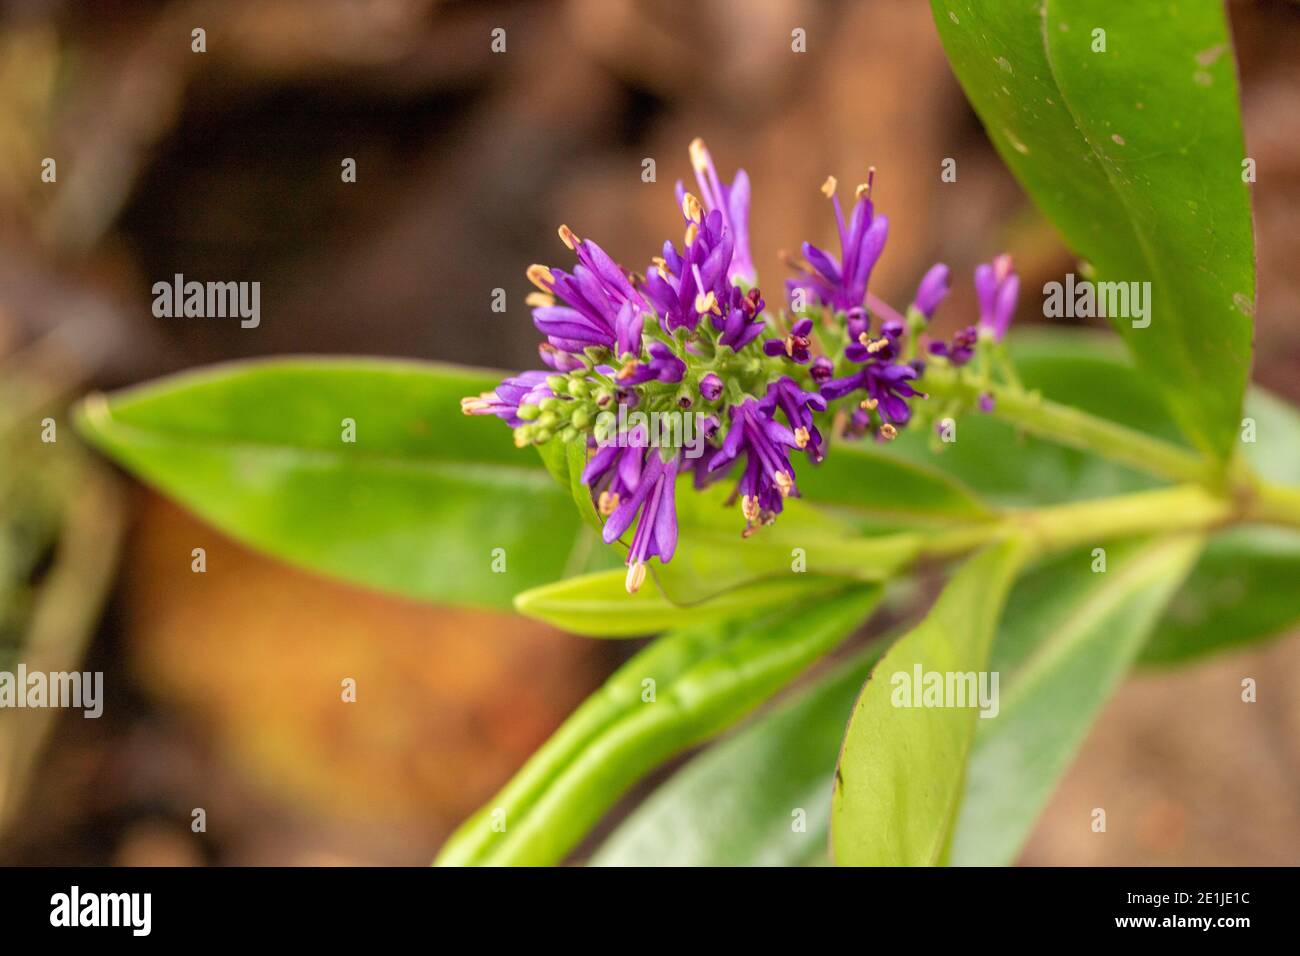 Hebe flower and shiny leaves close-up nature portrait Stock Photo